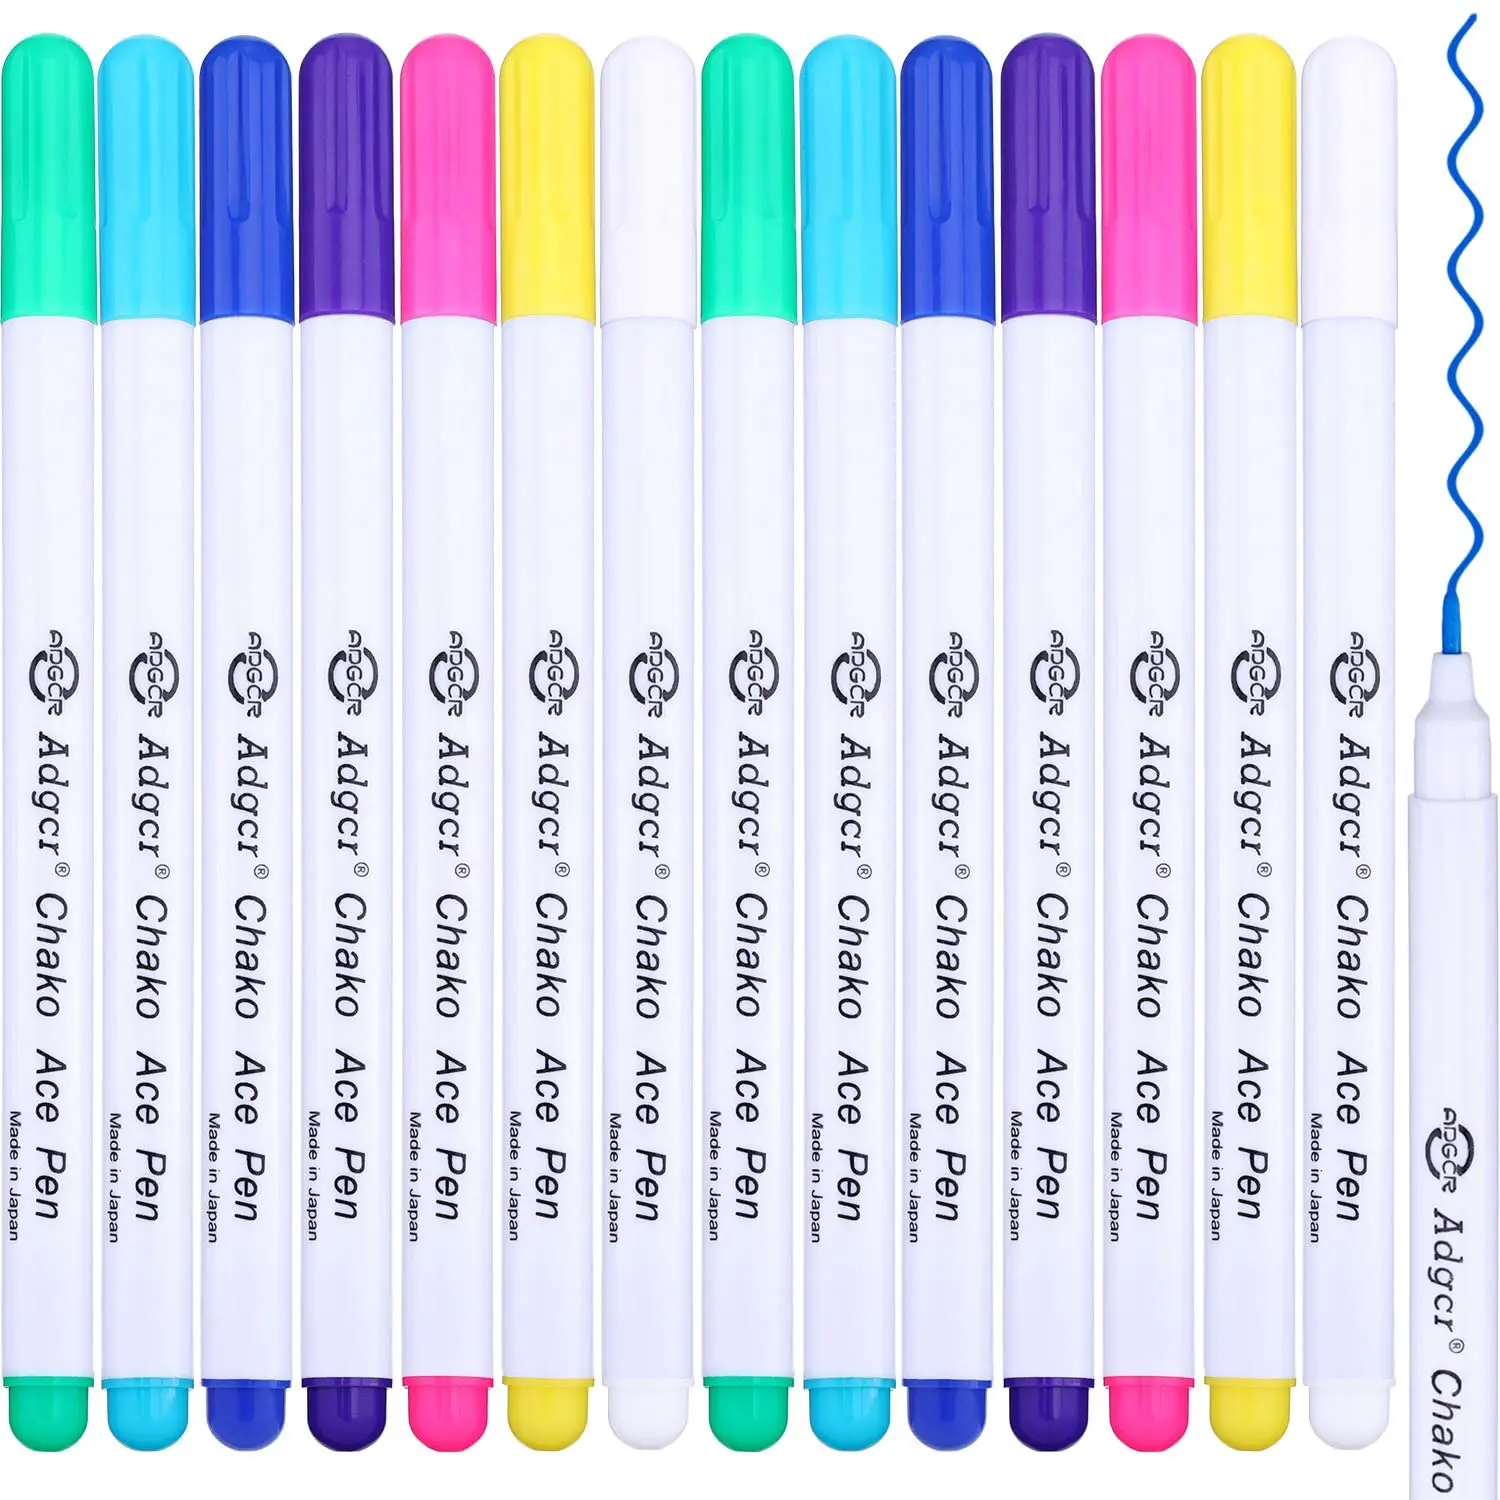 Disappearing Ink Pen // Craft Supplies, Pattern Marker, Benzie